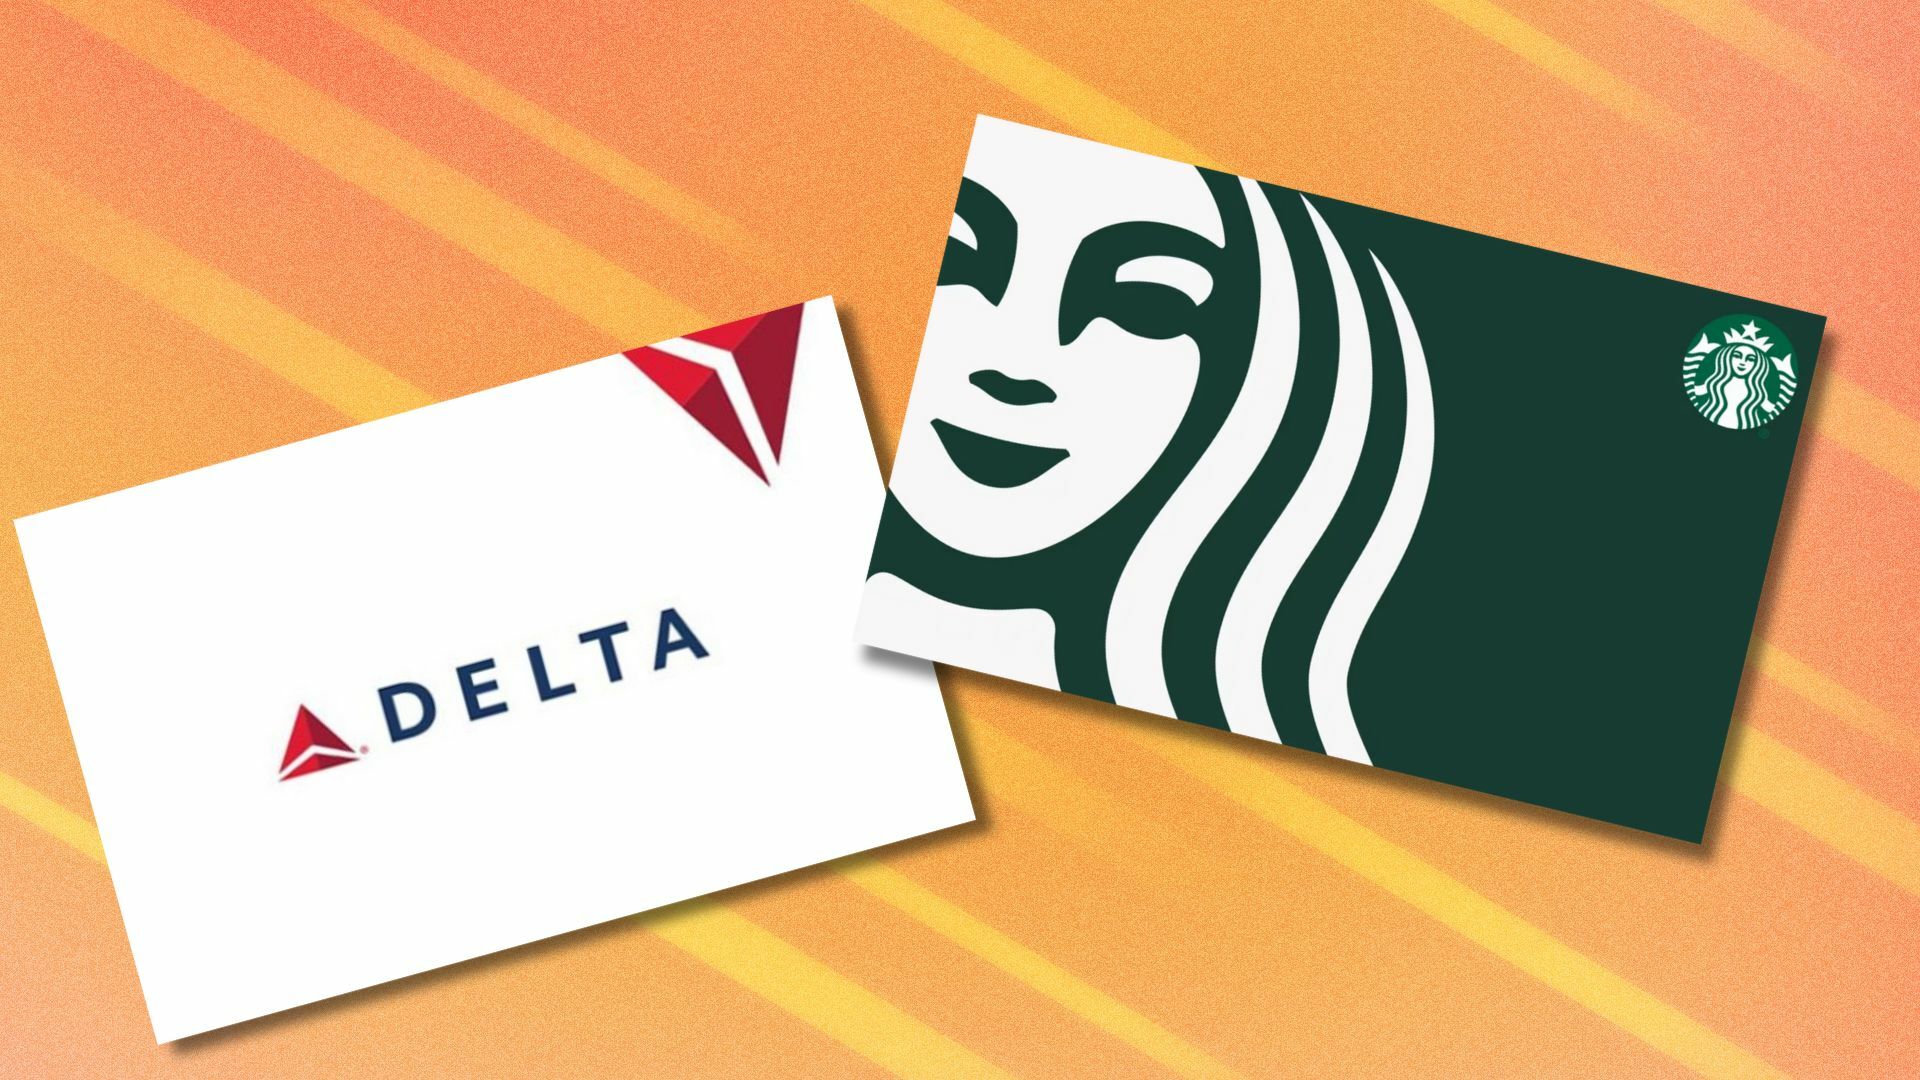 a delta gift card and a starbucks gift card on a orange streaky background